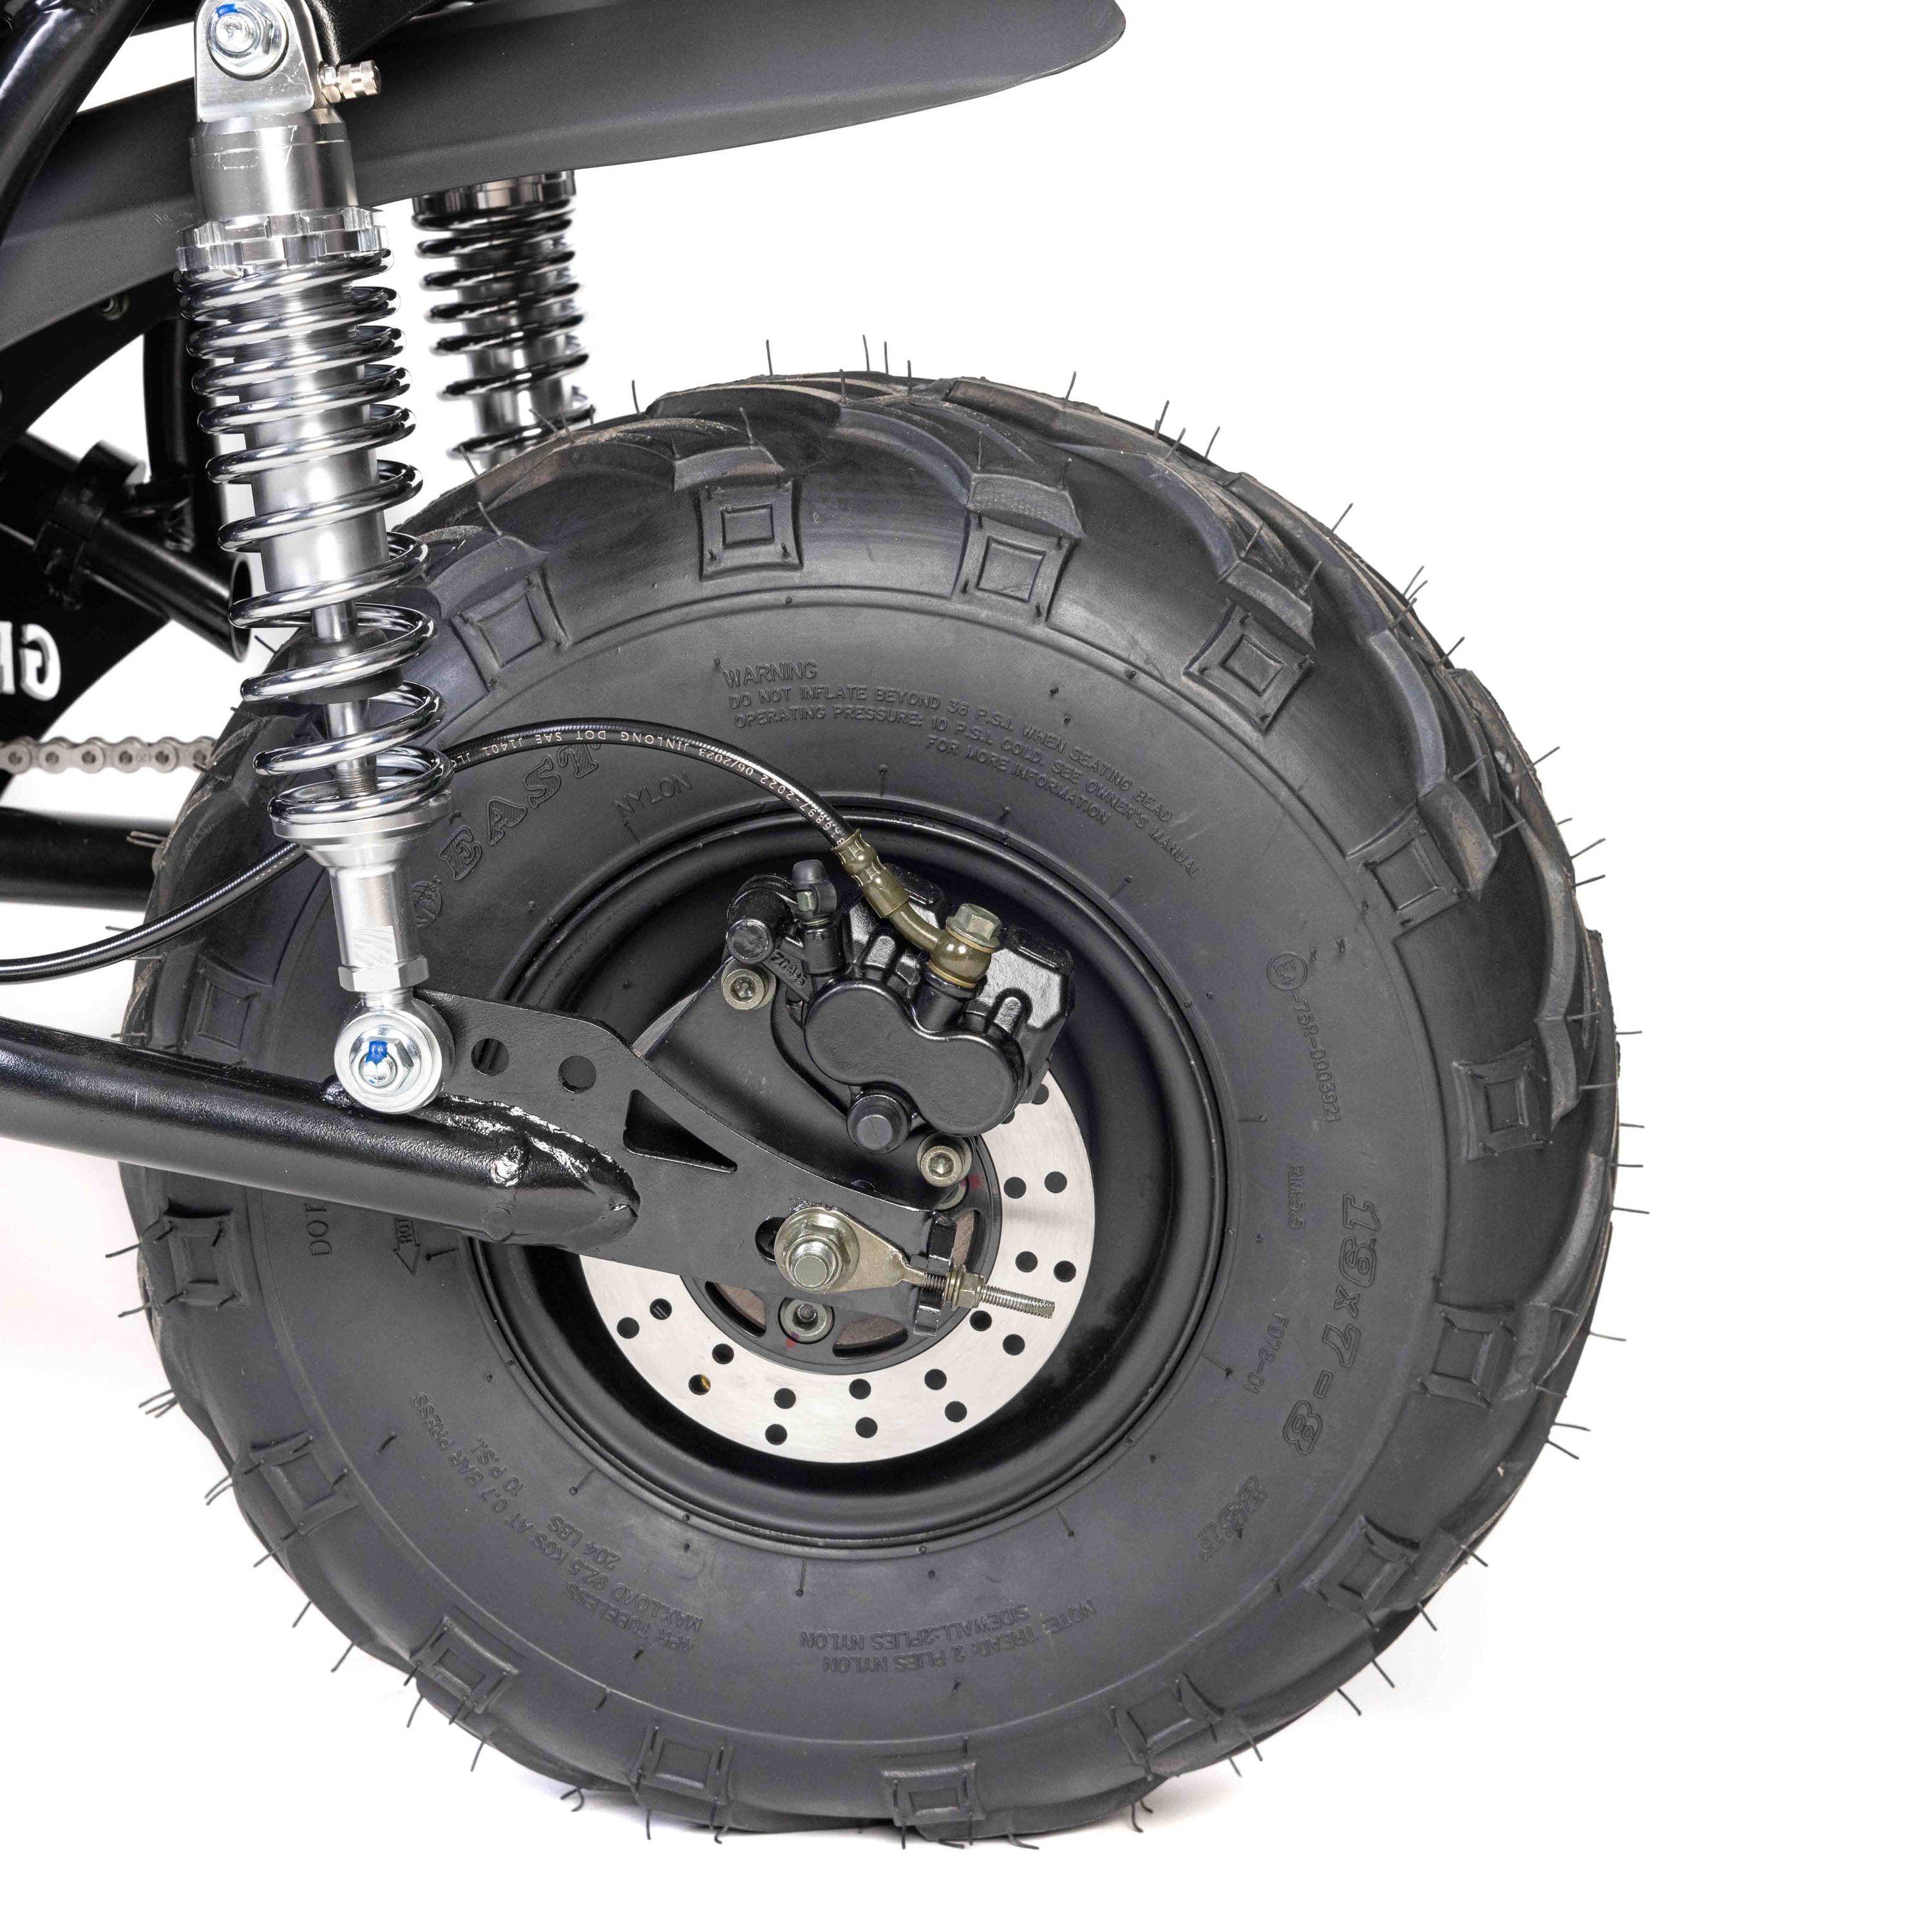 Megalodon Rear Swing Arm Kit comes with adjustable Nitrogen Shocks and Hydraulic Rear Brake